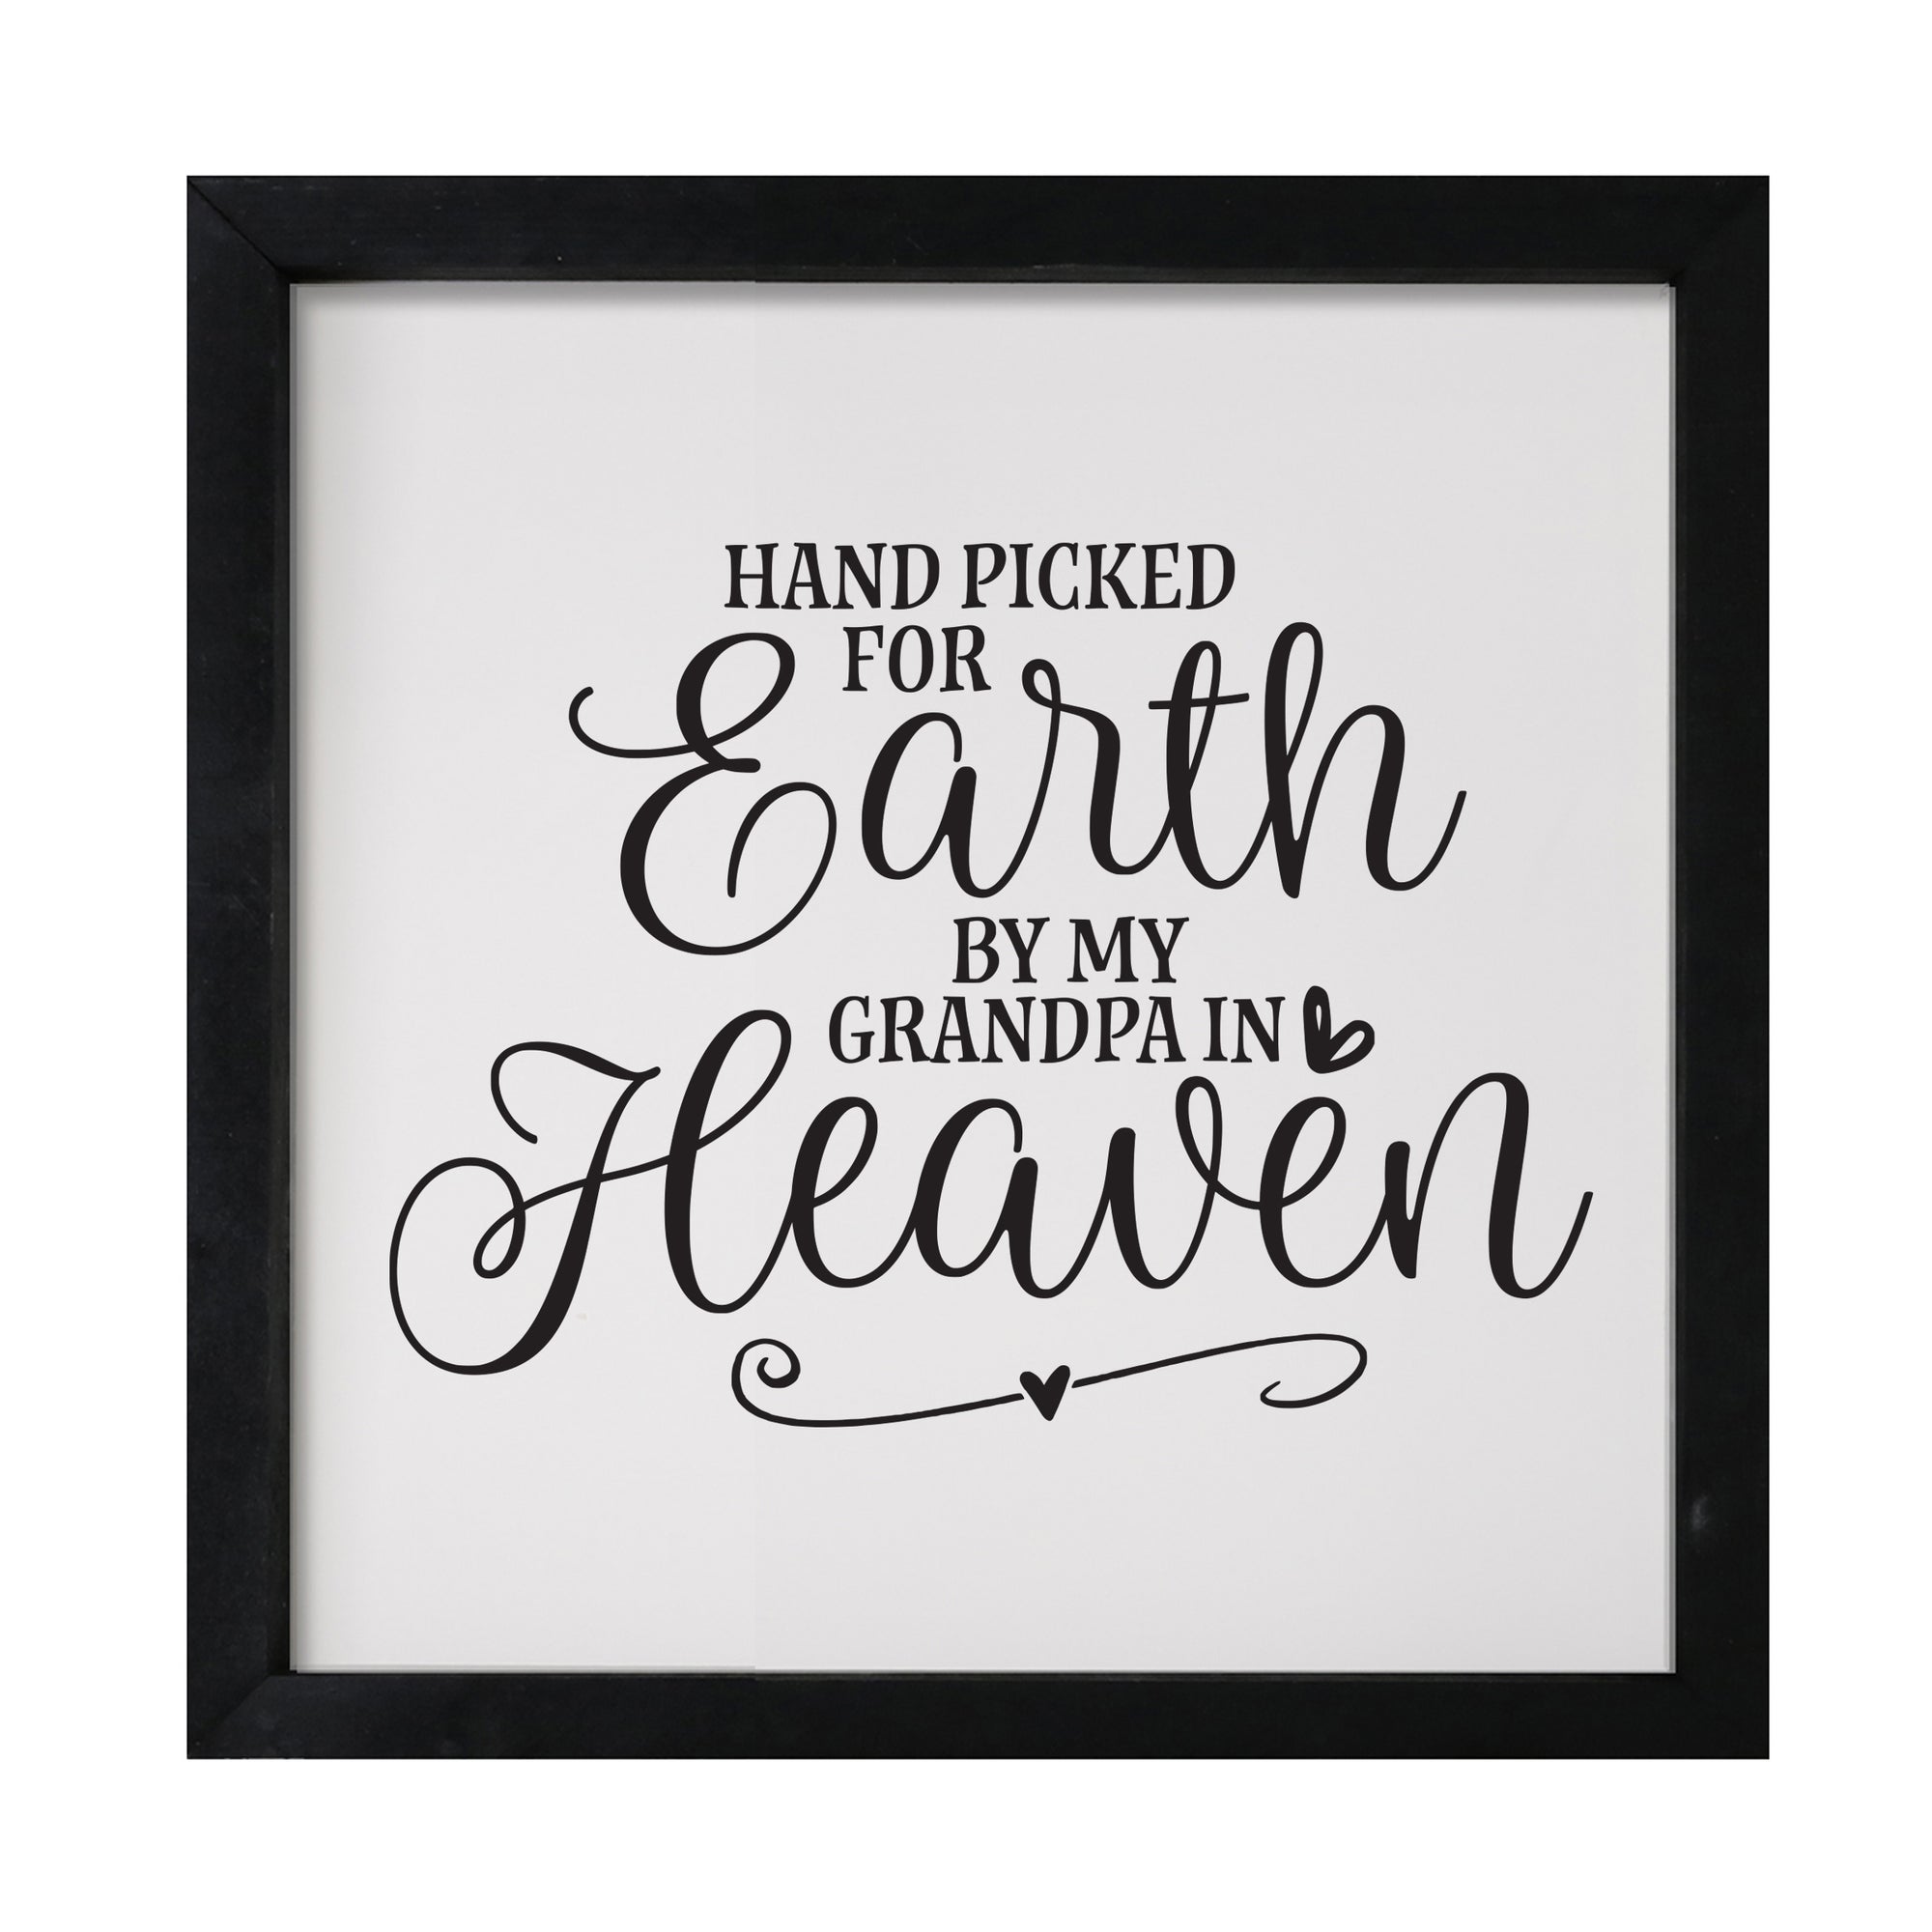 LifeSong Milestones Inspiring Modern Framed Shadow Box 7x7in - Hand Picked For Earth By My Grandpa. Wall Decor Decorative Accents For Walls Ready to Hang for Home Living Room, Bedroom, Kitchen, Dining Room, and Entryways Decorations.